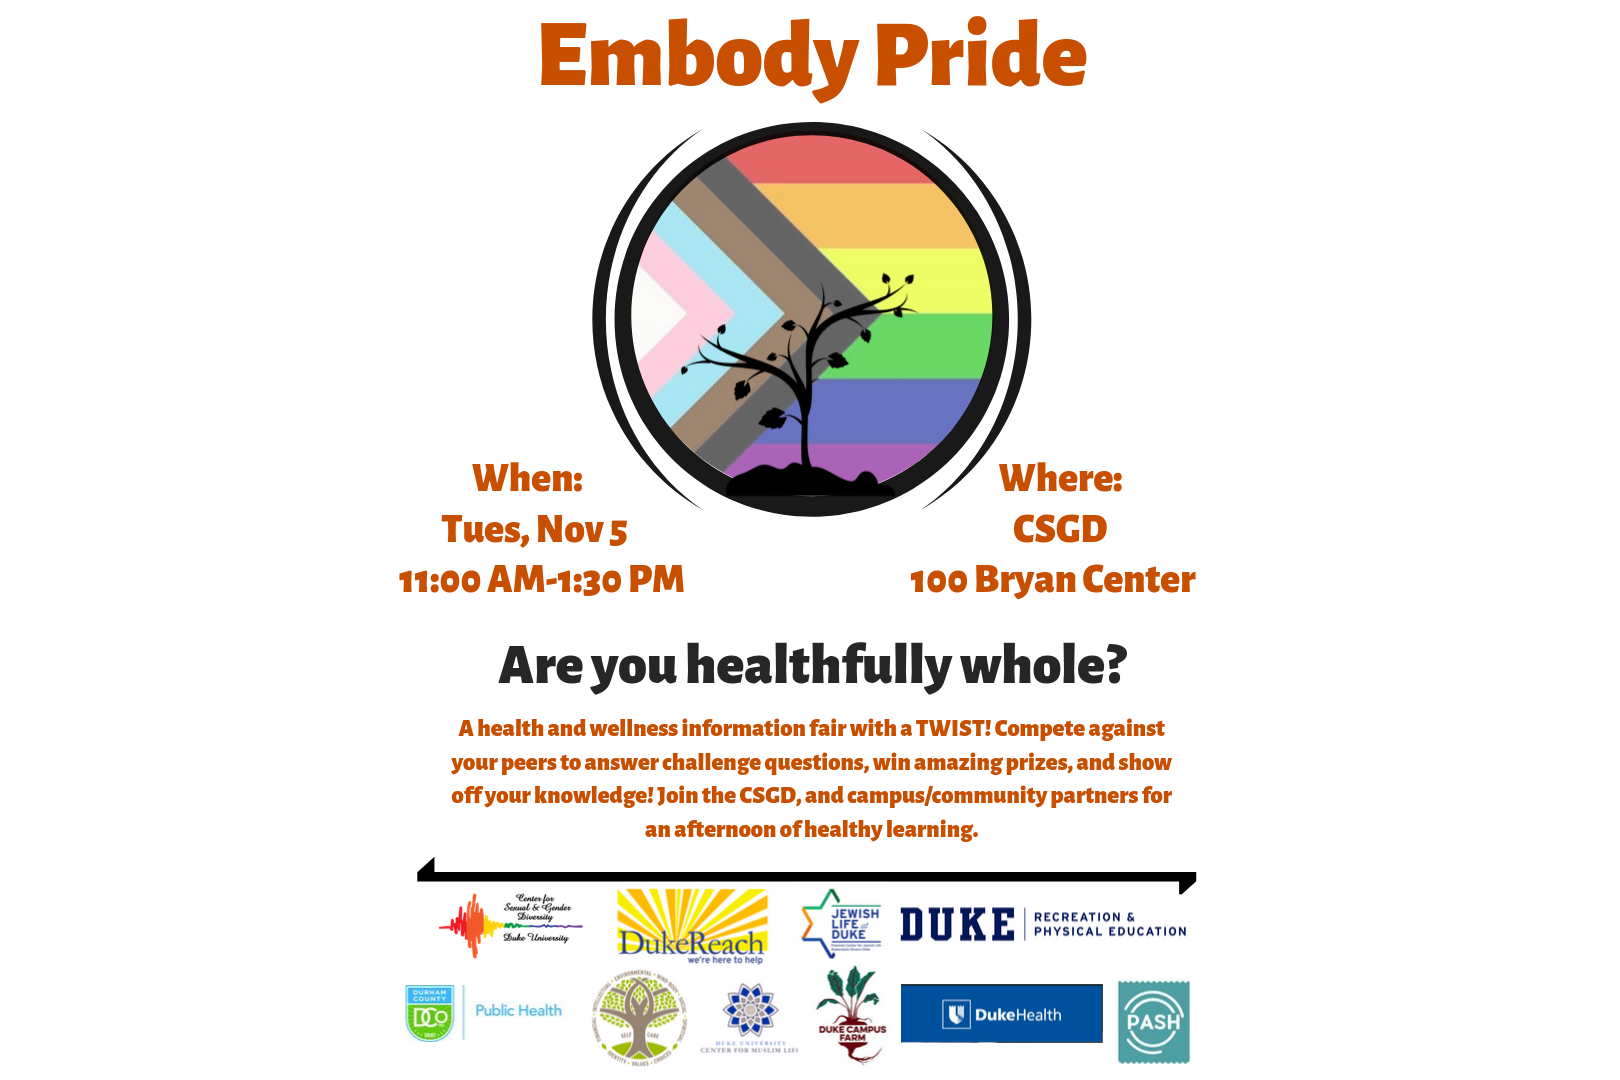 Text: Embody Pride. Tuesday Novemebr 5 from 11AM-1:30PM. Are you healthfully whole? The CSGD wants to know! The Center is hosting a LGBTQIA+ health and wellness fair with a TWIST! Compete against your peers to answer challenge questions, win amazing prizes, and and show off your knowledge.Stop by the CSGD on Tuesday, November 5 from 11AM-1:30PM for an afternoon of healthy learning with our Center, and campus/community partners! White background with pride flag coupled with plant.